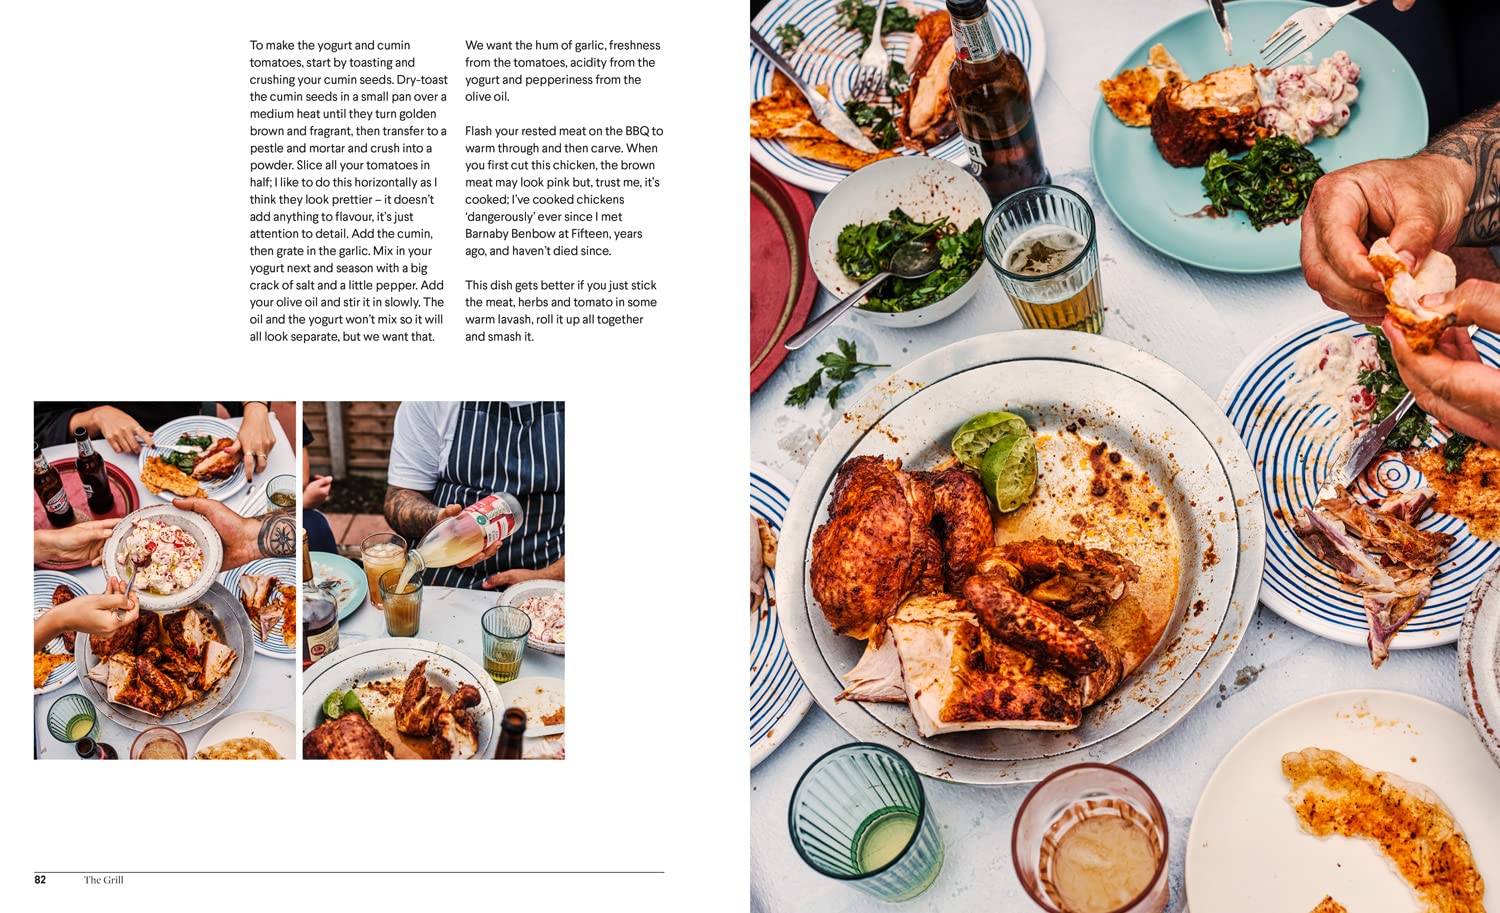 Big Has Home: Recipes from North London to North Cyprus (Hasan Semay)